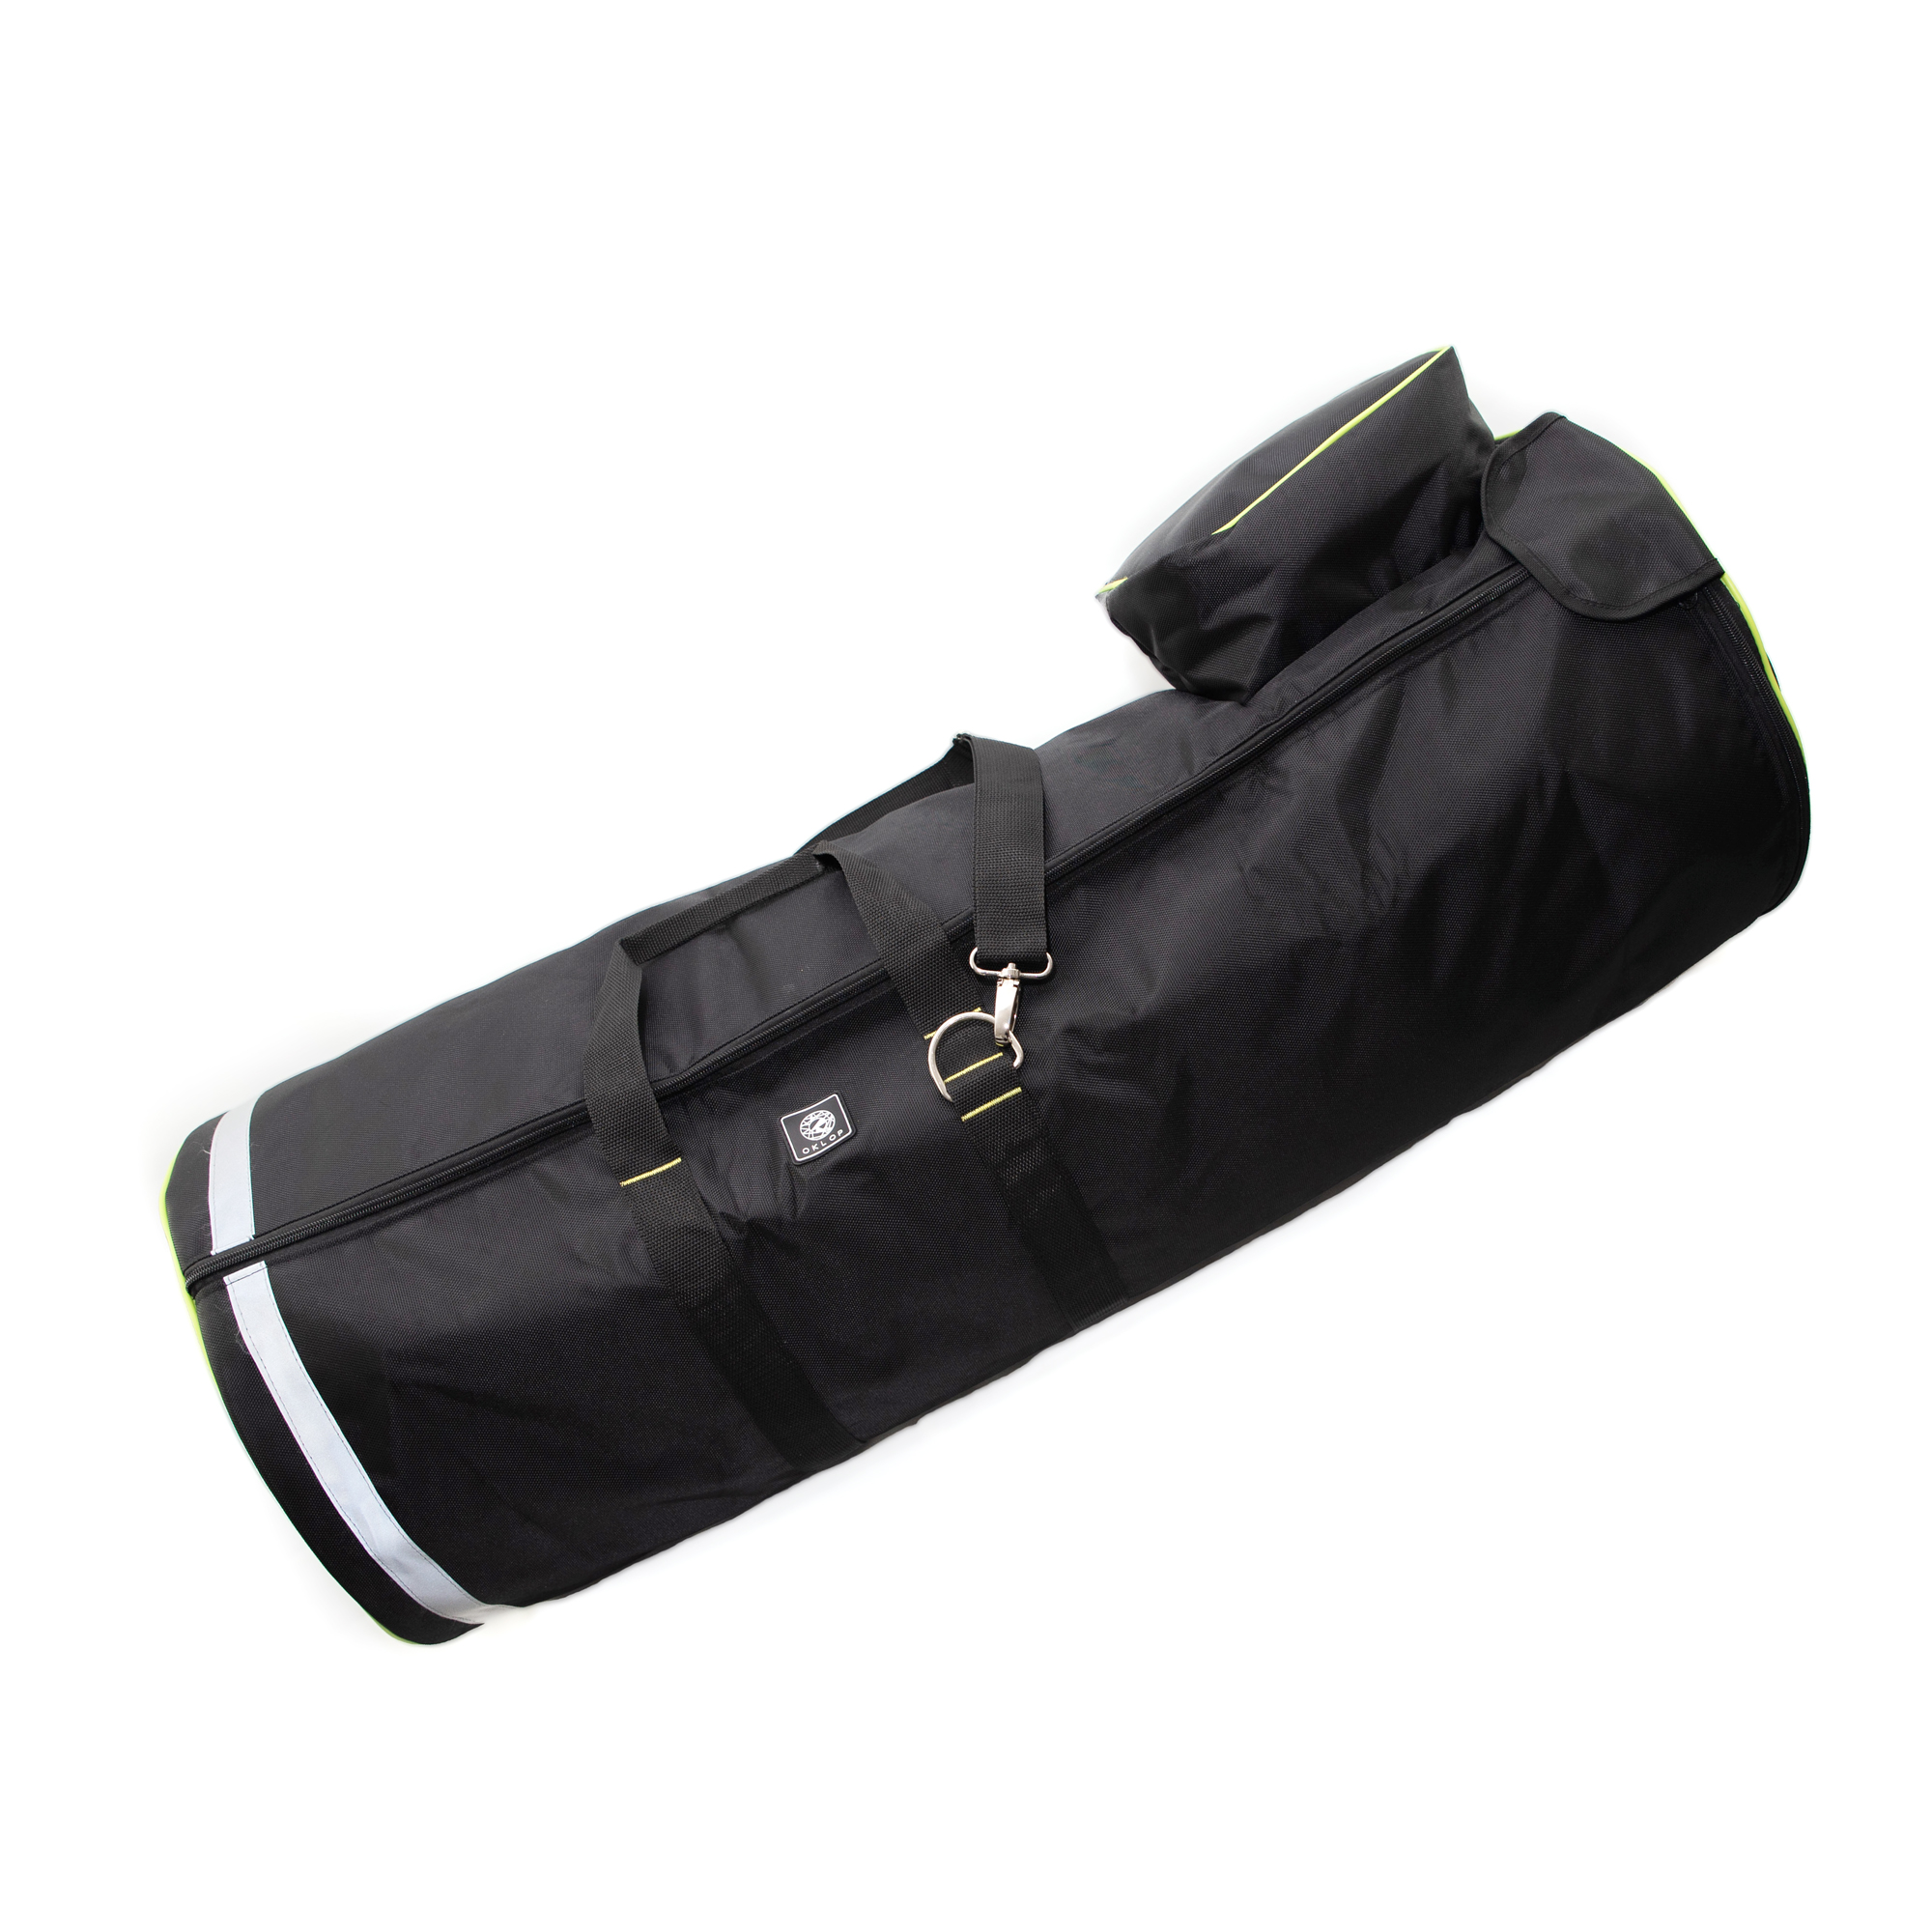 Oklop Padded Bag for 200/800 Newtonians